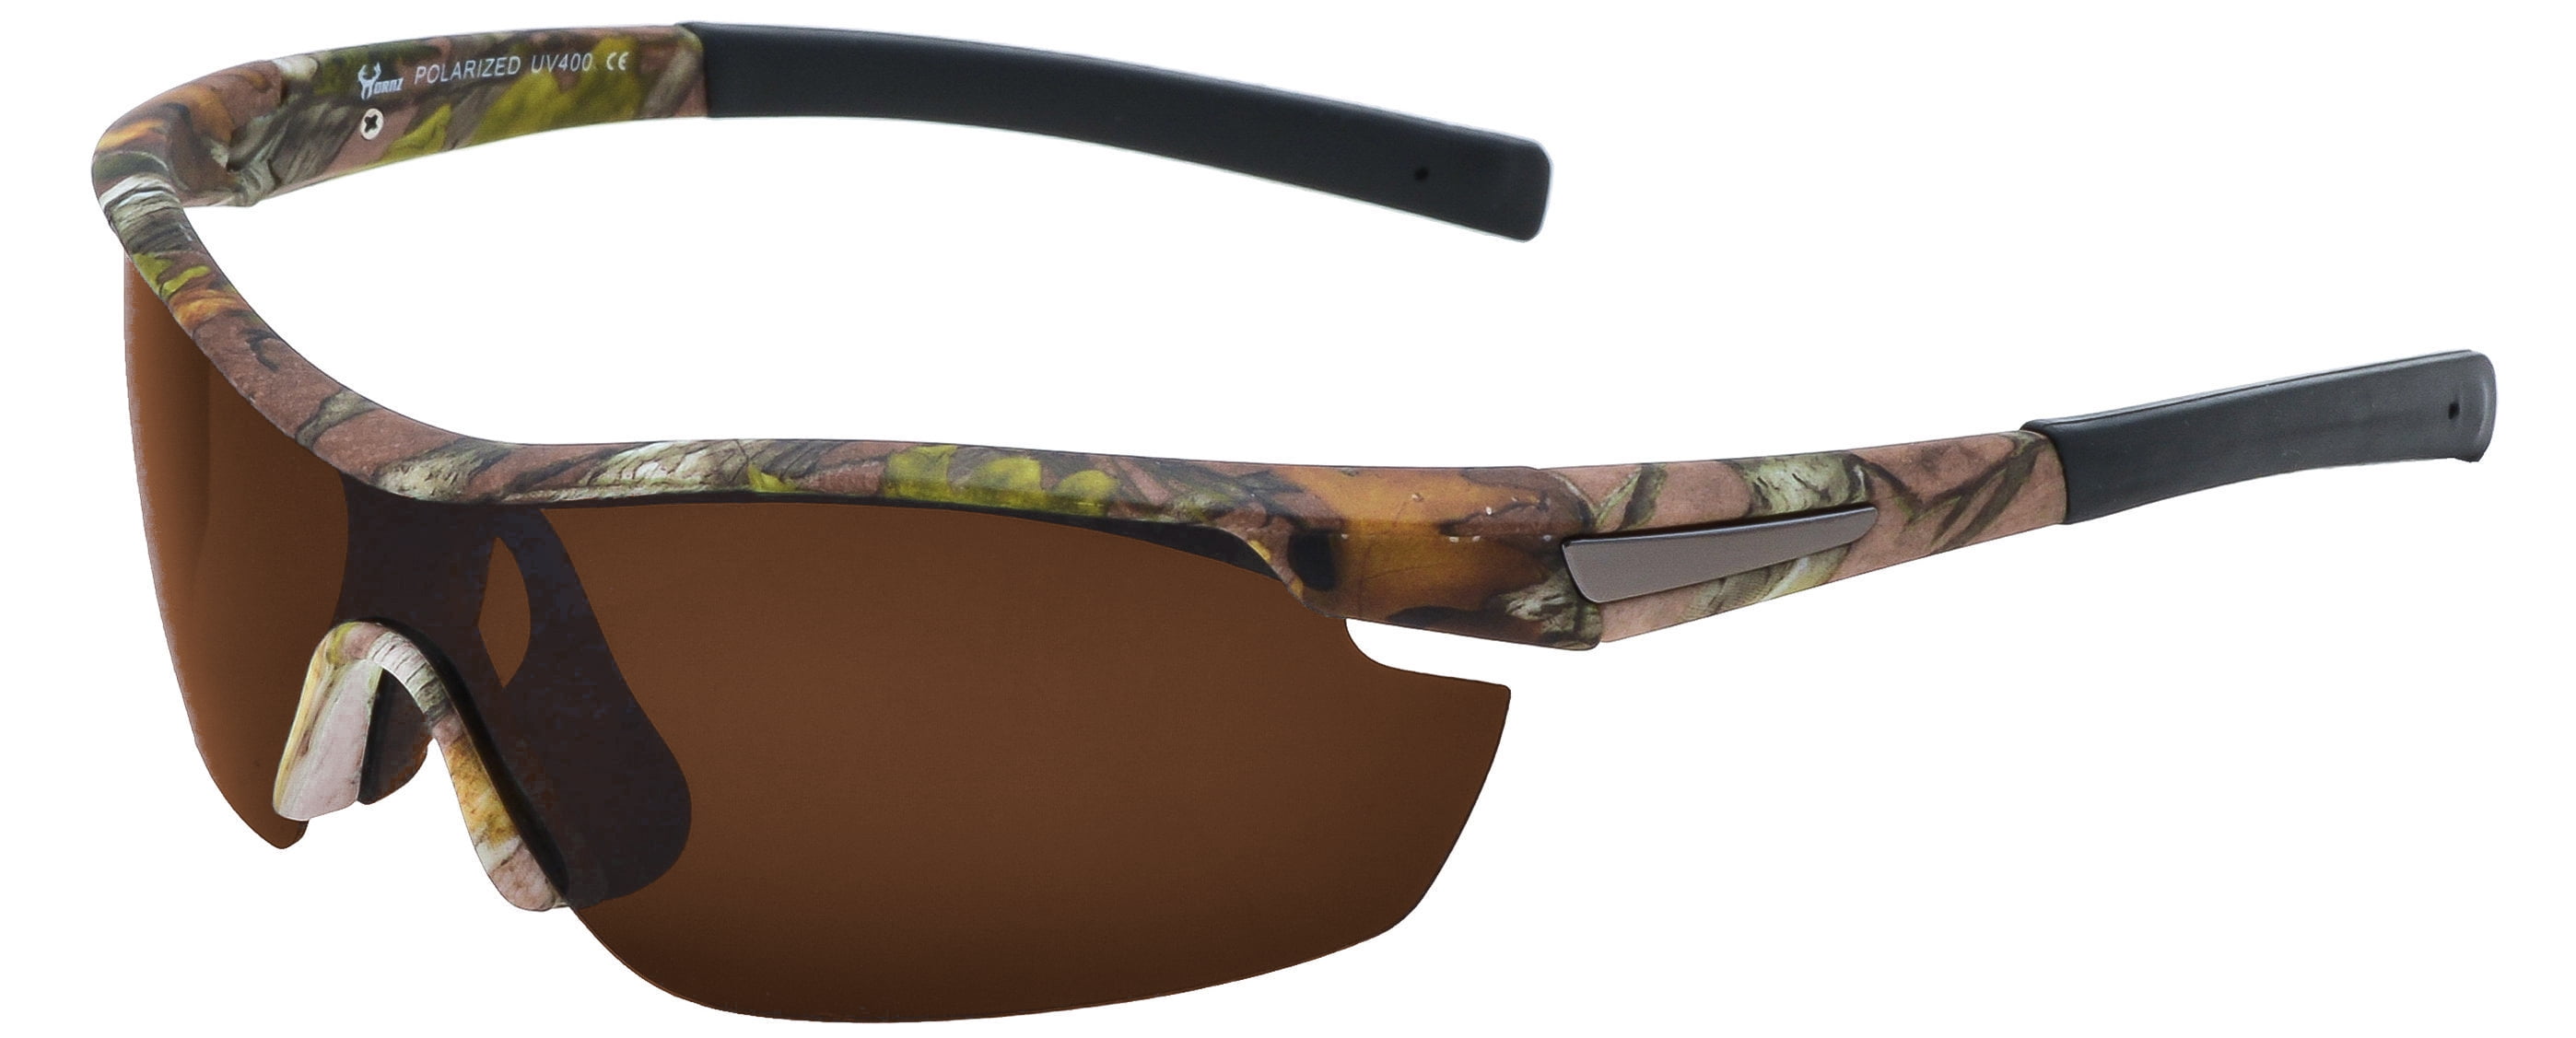 Hornz Brown Forest Camouflage Polarized Sunglasses for Men Wrap Around  Sport Frame & Free Matching Microfiber Pouch - Brown Camo Frame - Amber Lens